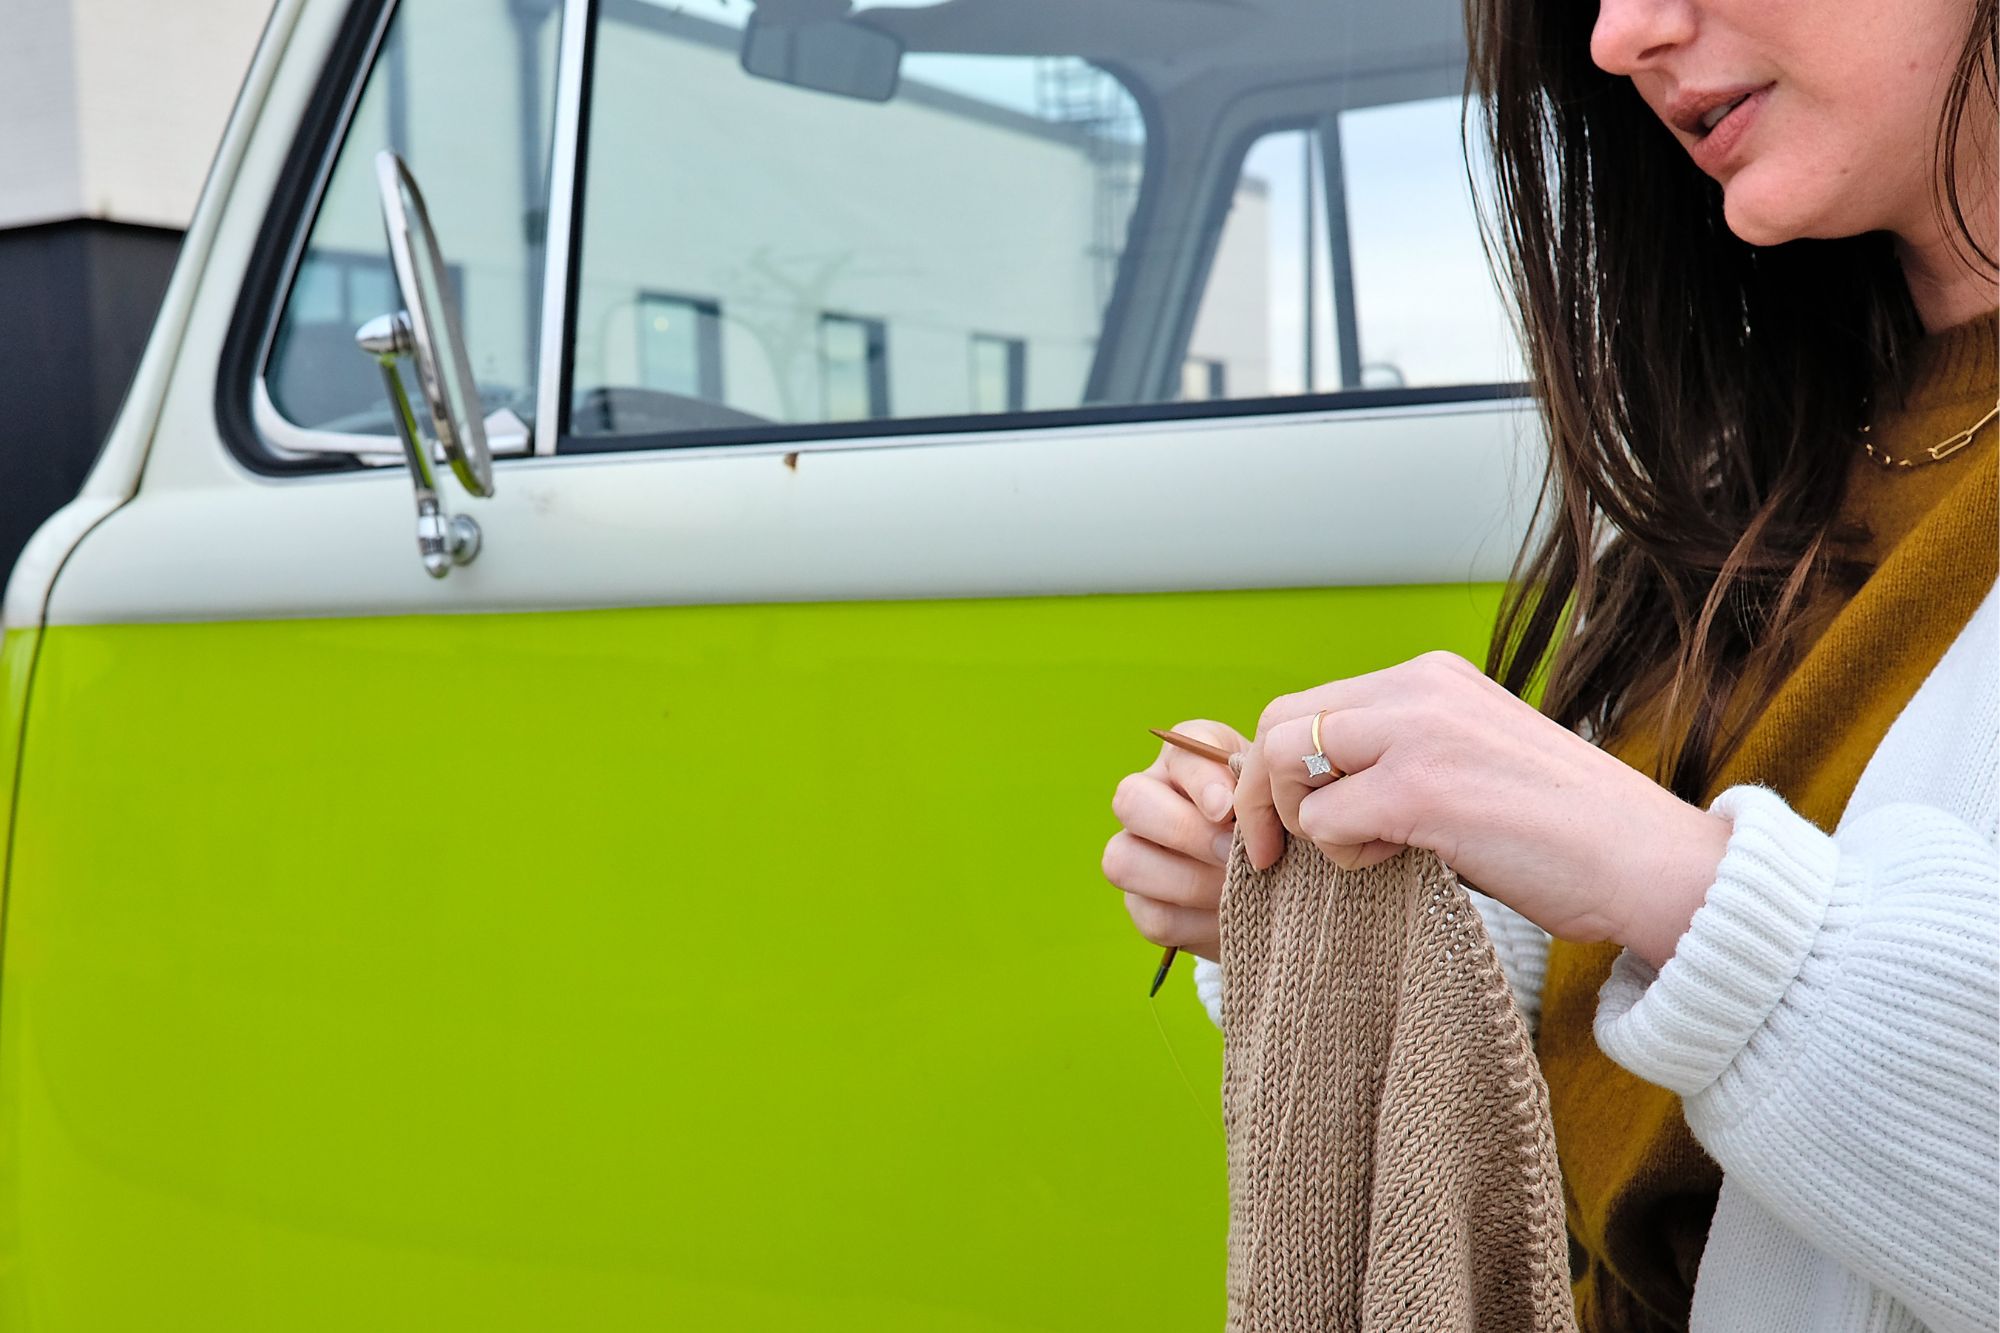 Alyssa stands outside of a VW bus and knits